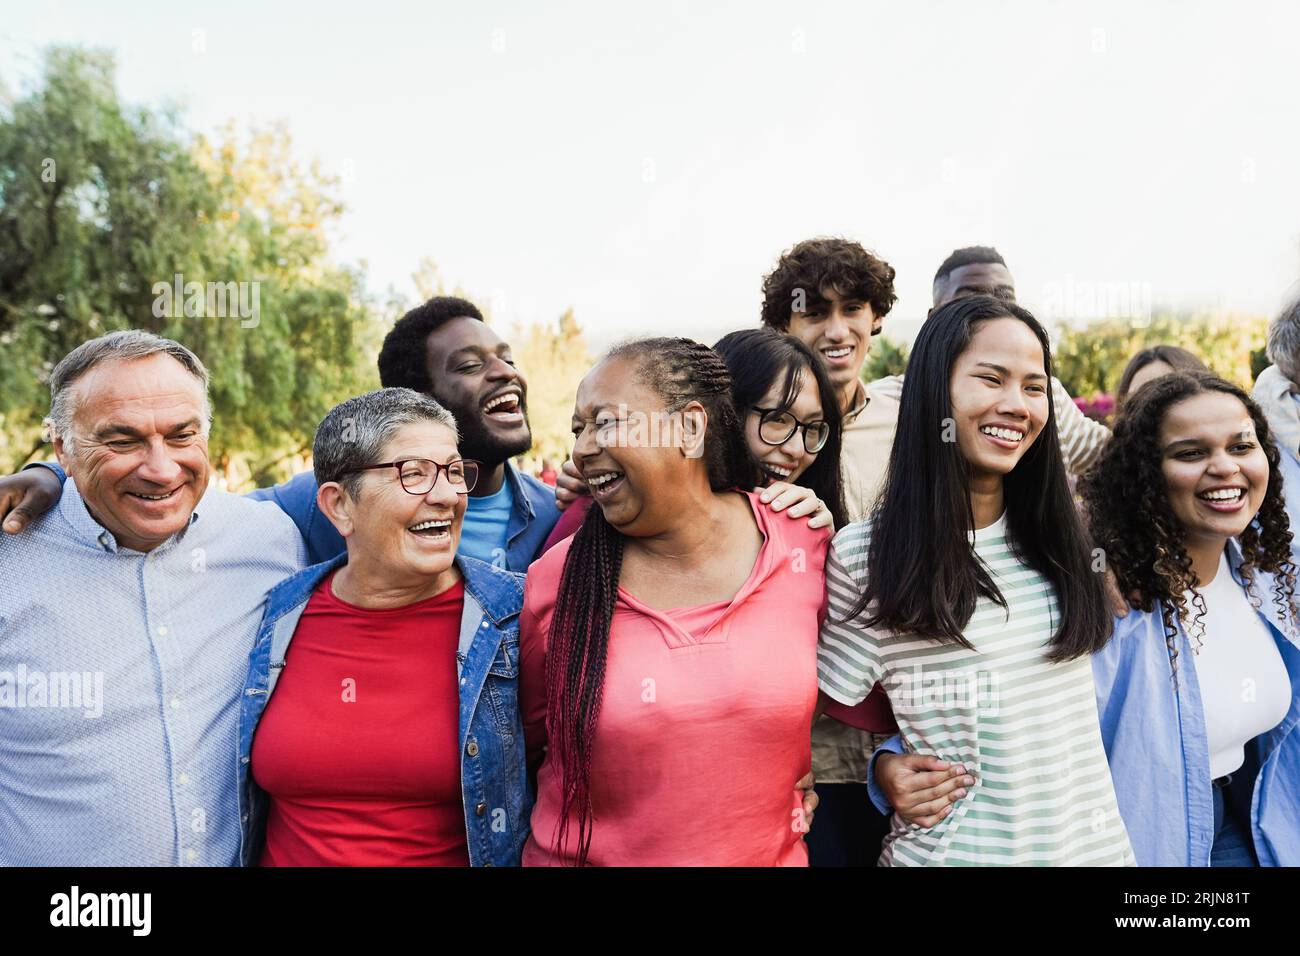 Group of multigenerational people smiling and laughing outdoor - Multiracial friends of different ages having fun together - Main focus on senor women Stock Photo